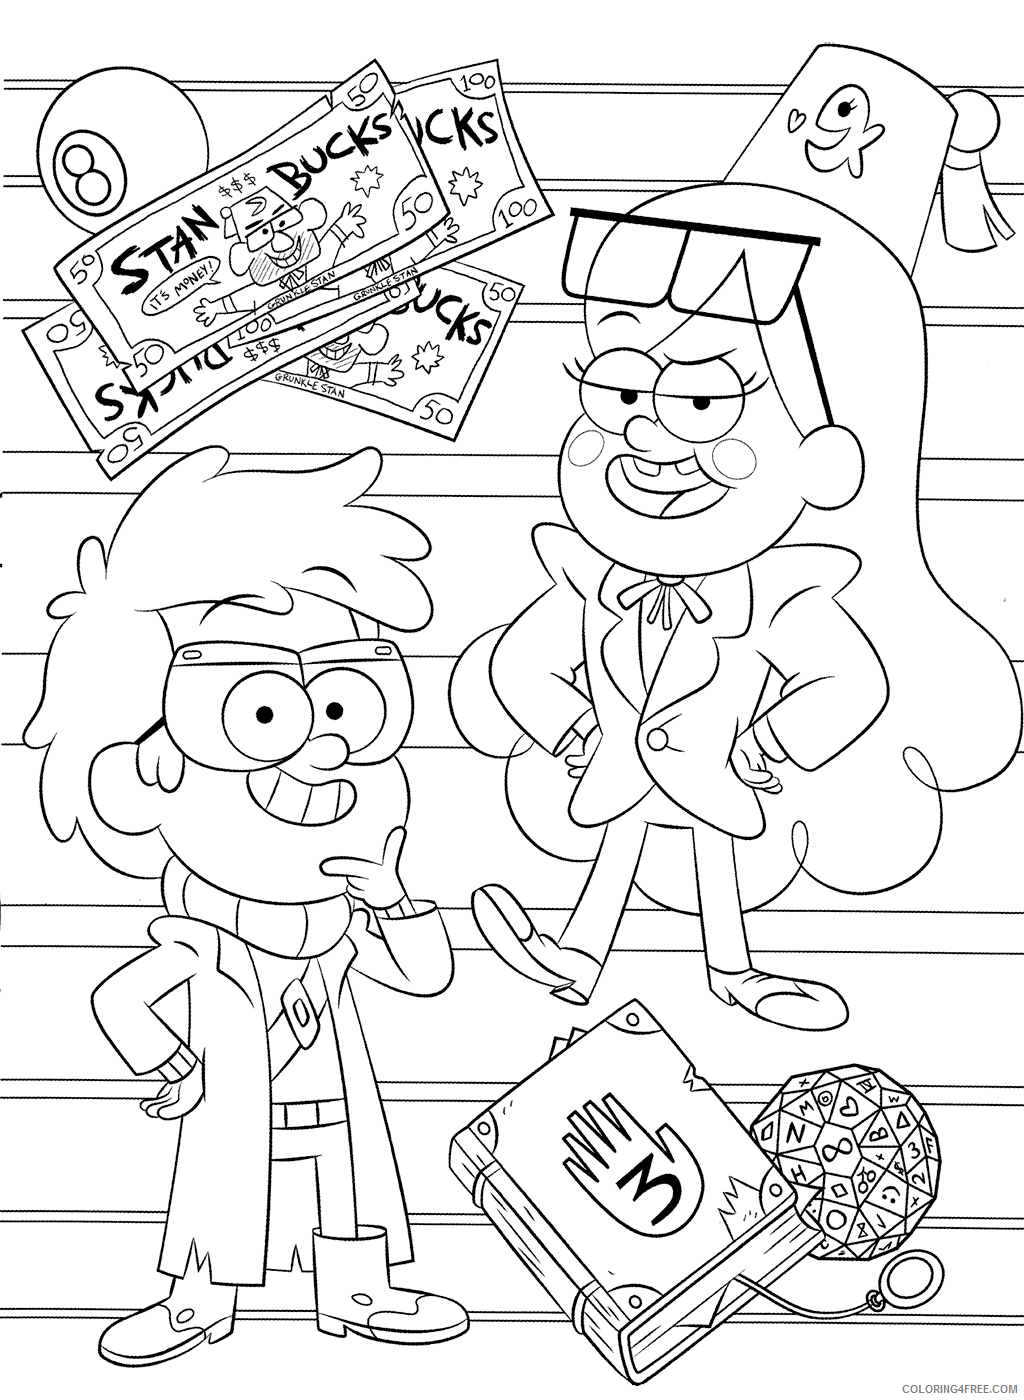 Gravity Falls Coloring Pages TV Film Mabel and Dipper Printable 2020 03376 Coloring4free